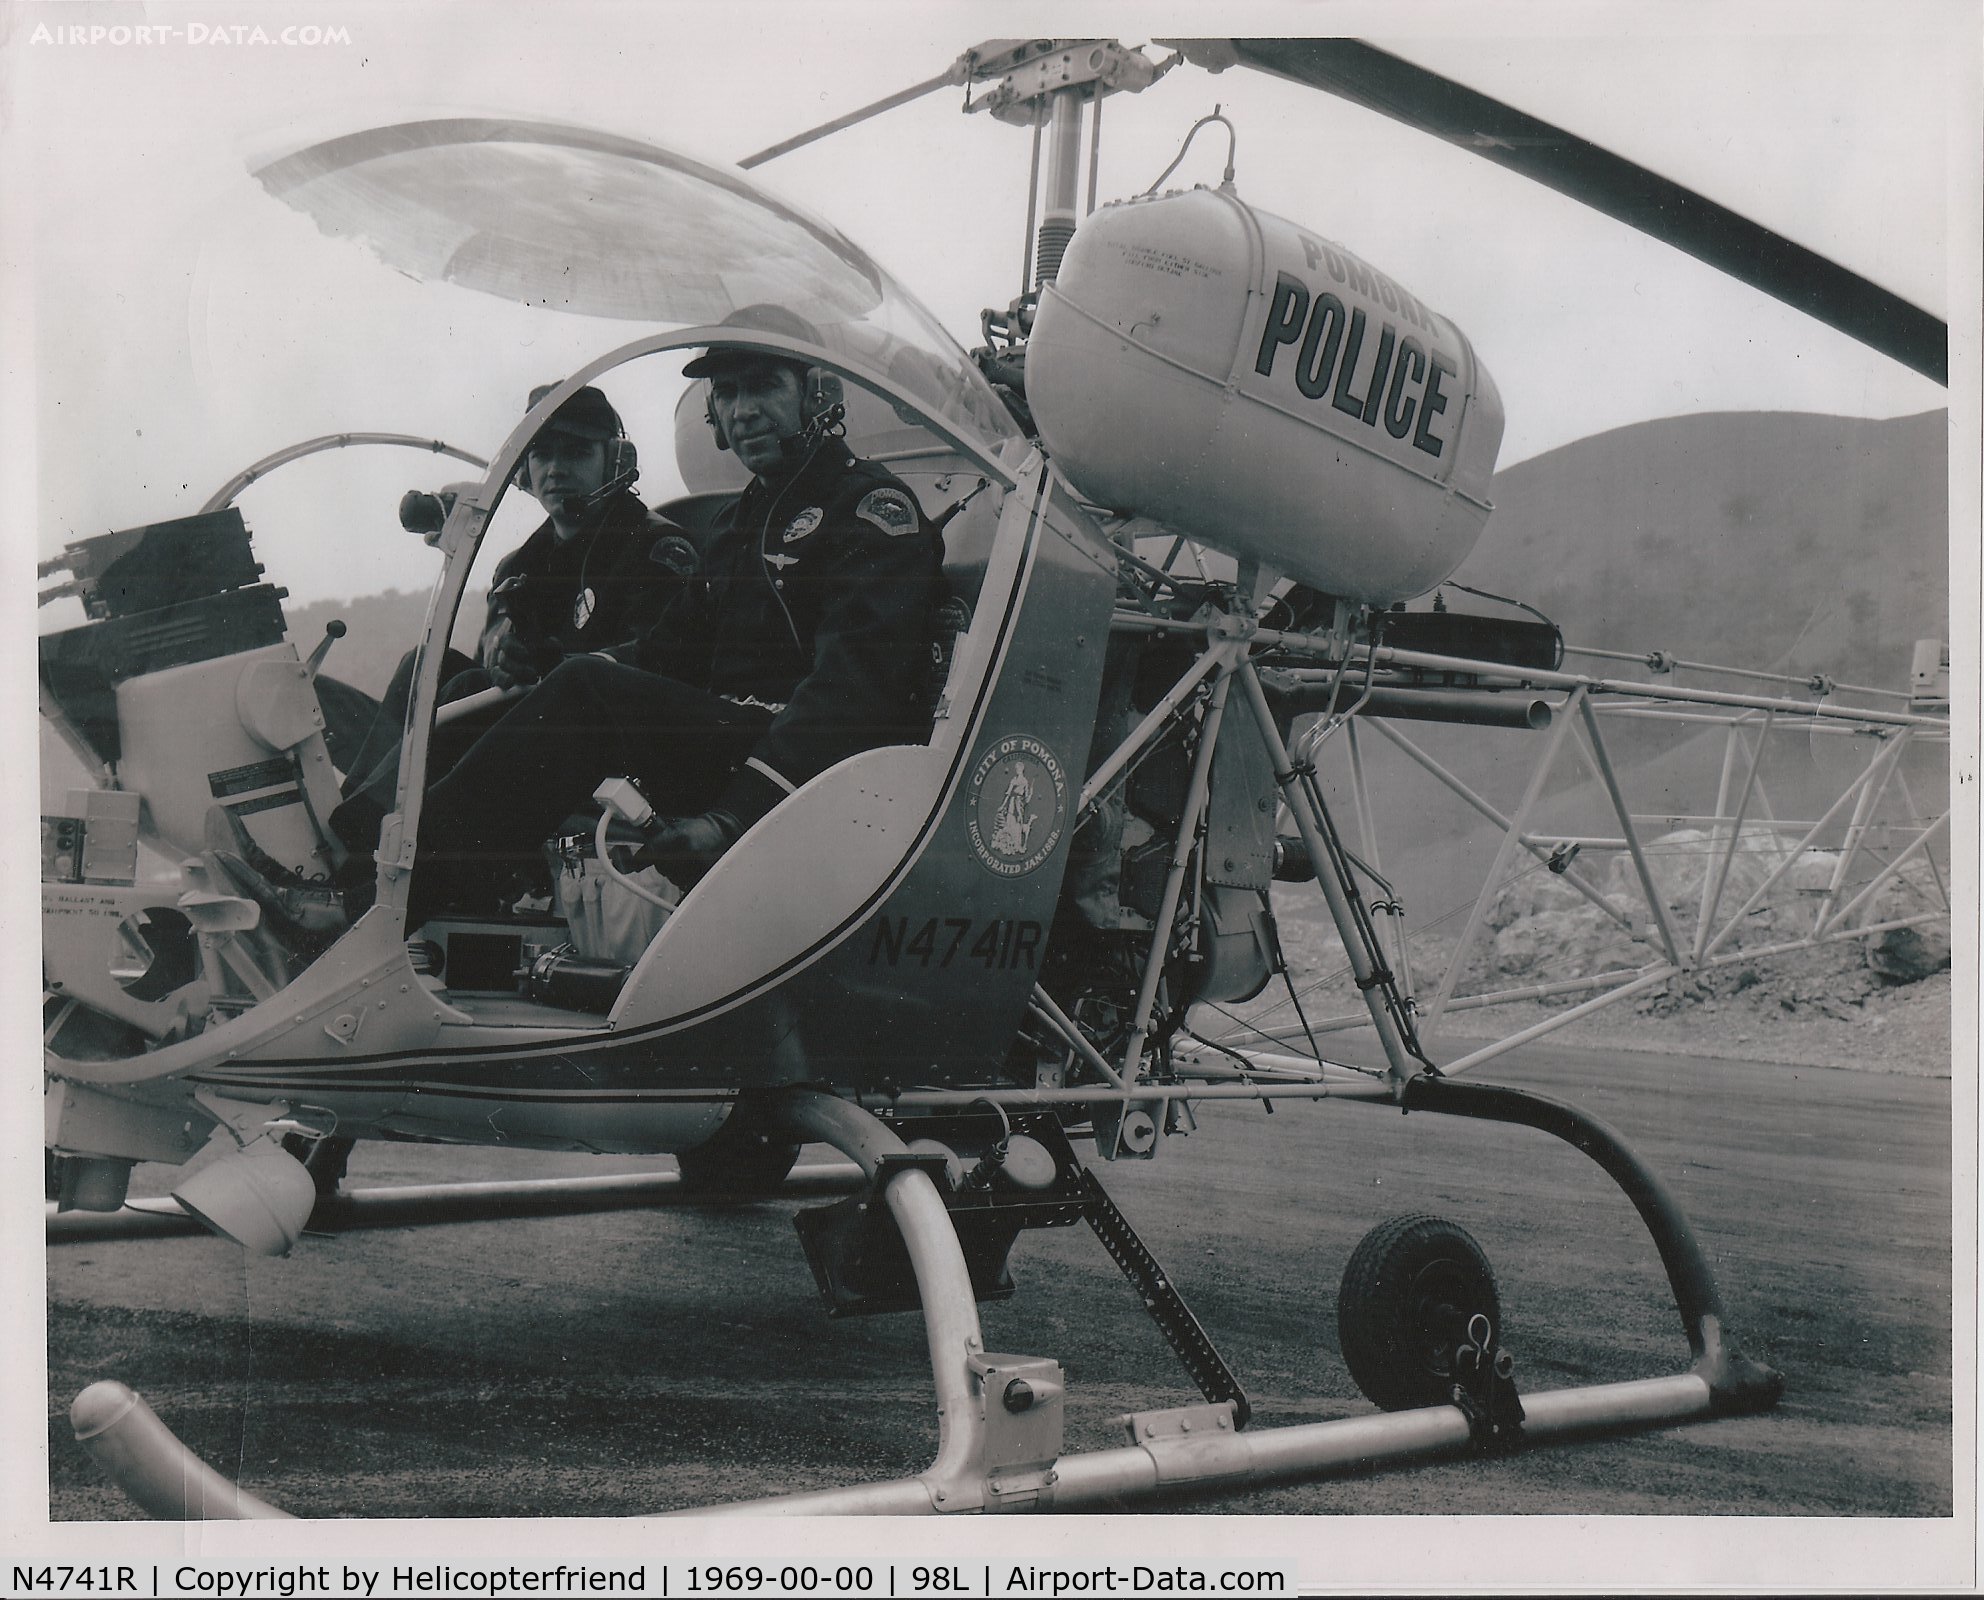 N4741R, 1968 Bell 47G-5 C/N 7917, Sent by Officer Fitch to upload 1969 era scanned